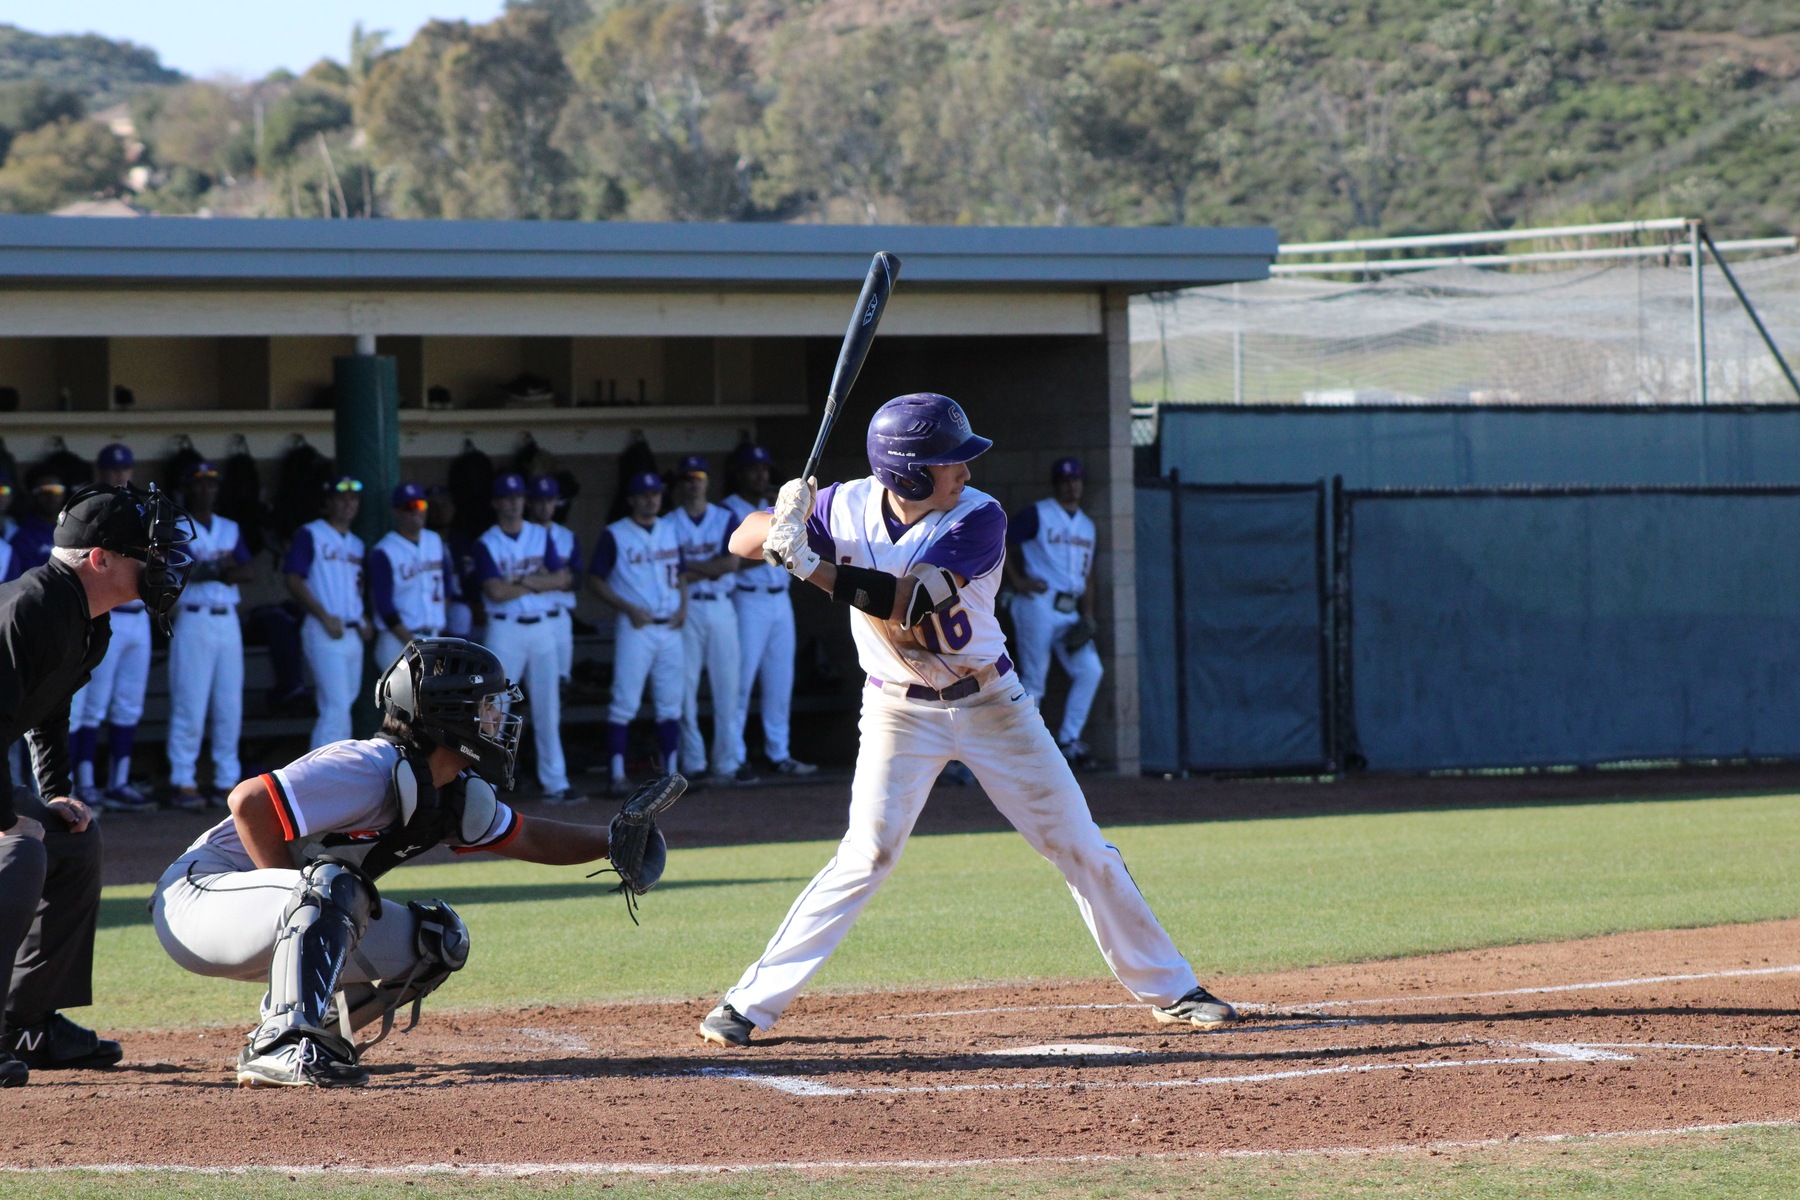 Kyle Reuser's ninth-inning double was the hit CLU needed Friday afternoon at CMS. (Photo Credit: Mariah Zermeno)